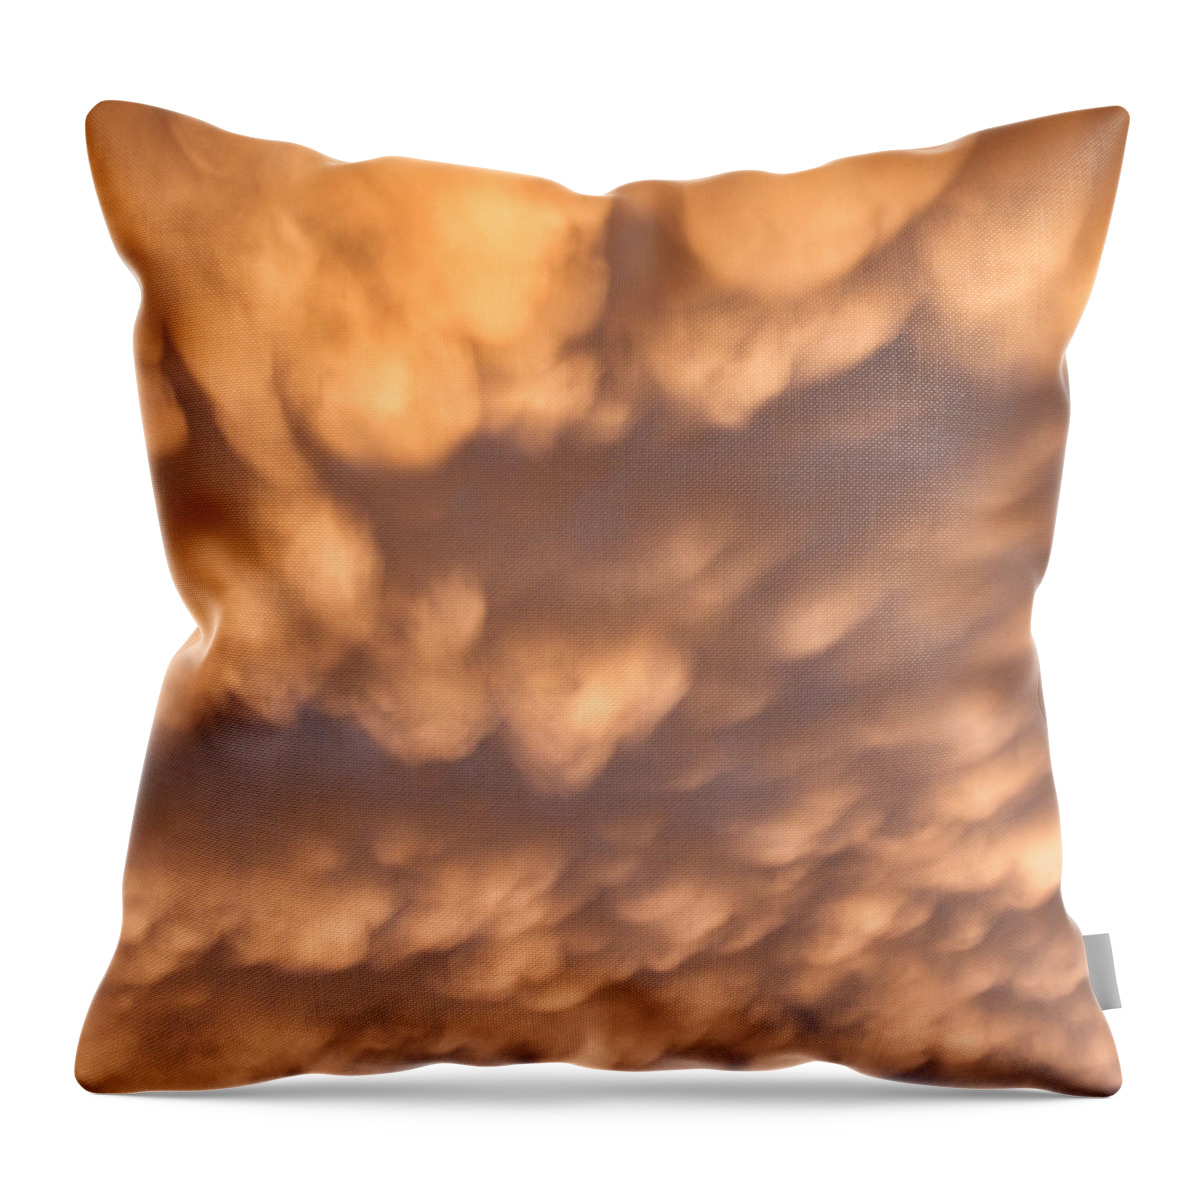 Sunset Throw Pillow featuring the photograph Sunset Pillows by William Selander